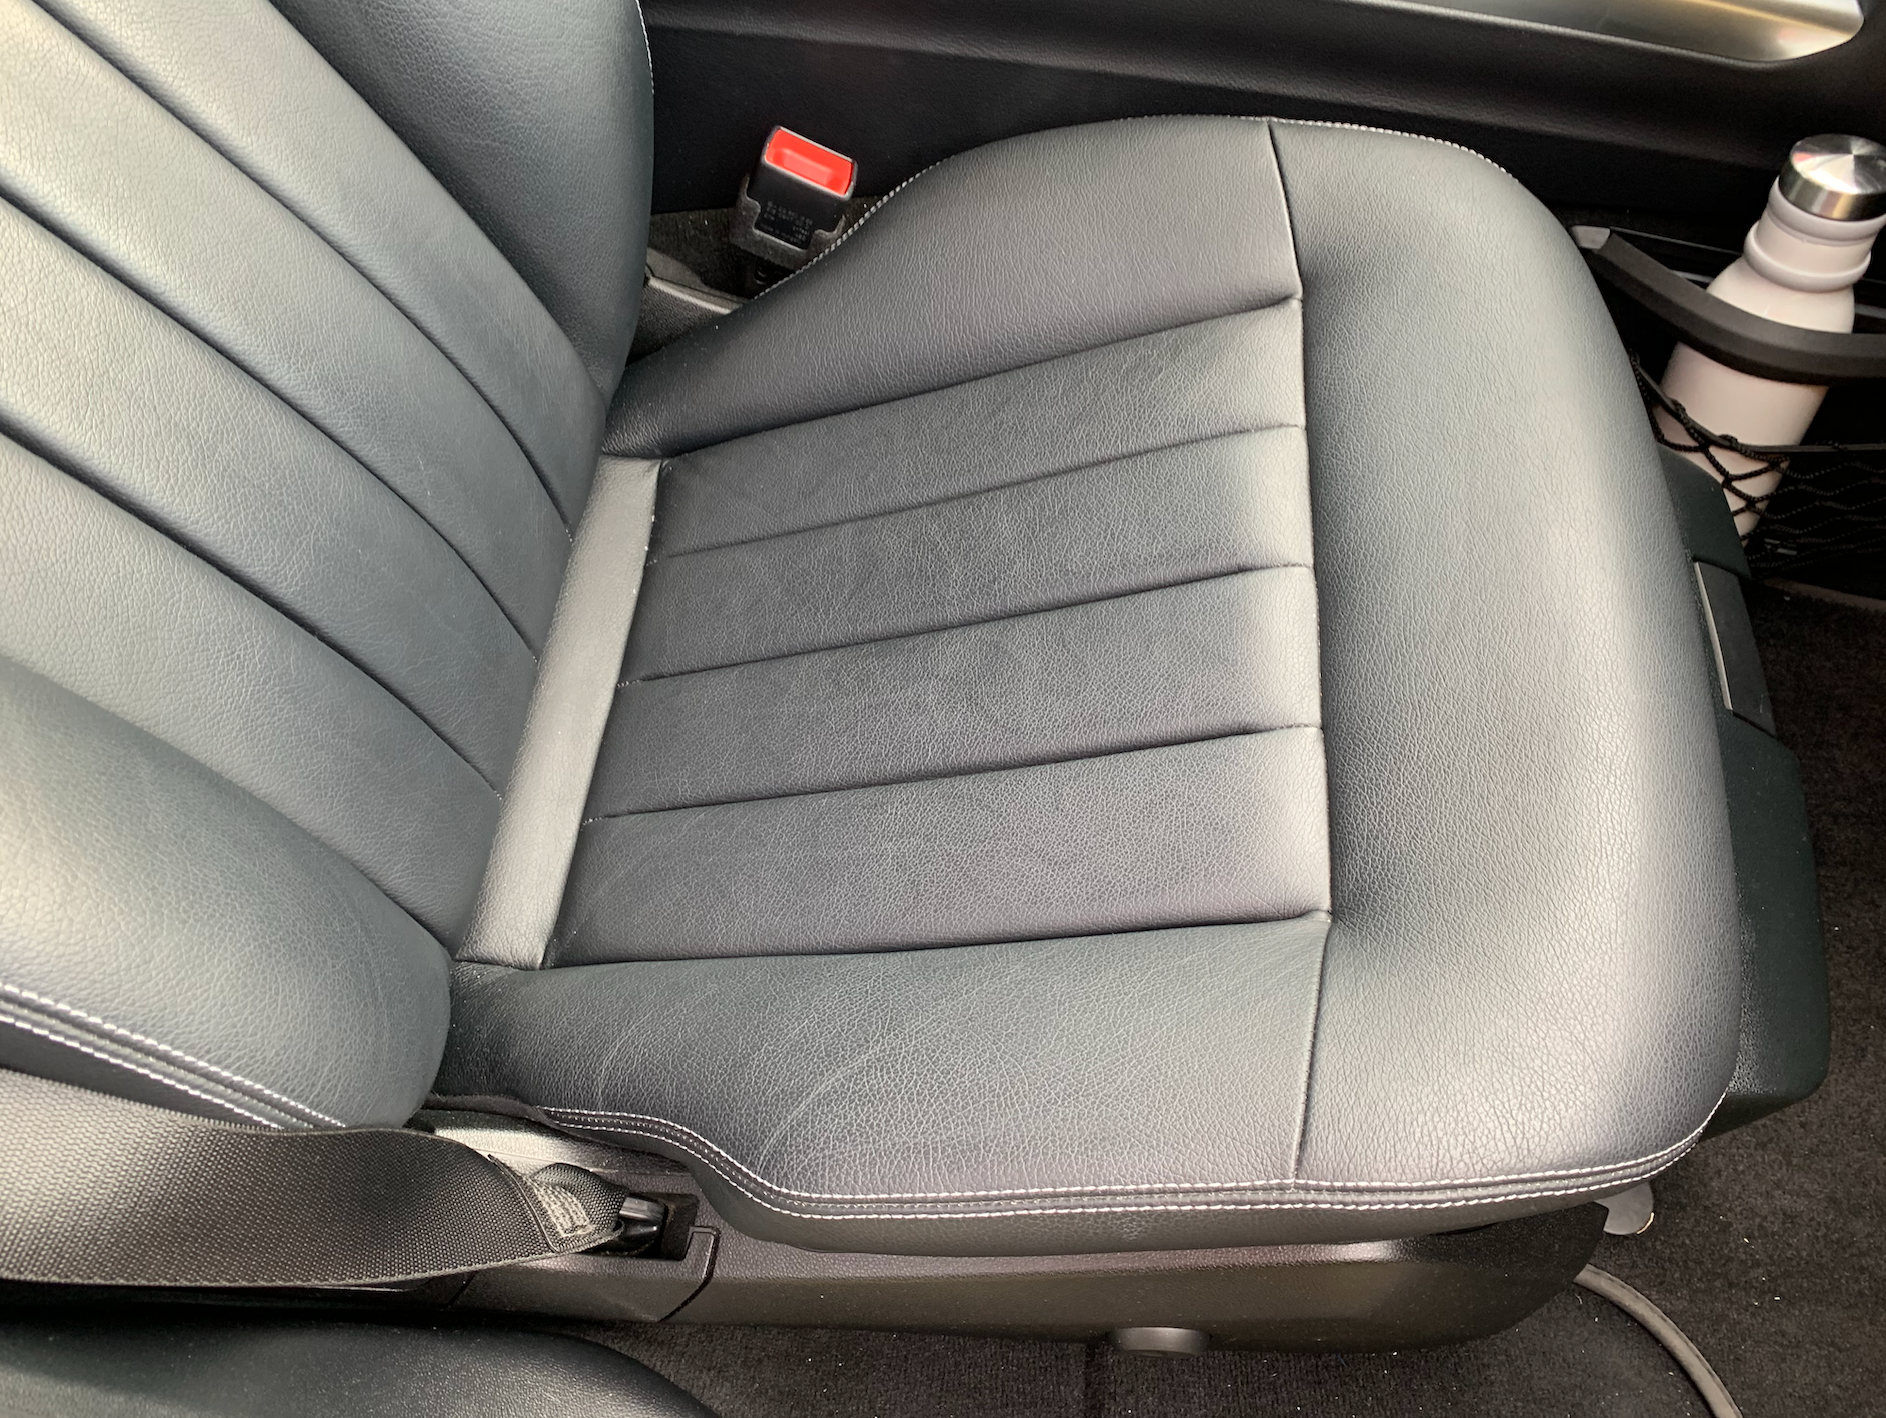 Heated Seat Coil Outline on Leather Seat - MBWorld.org Forums